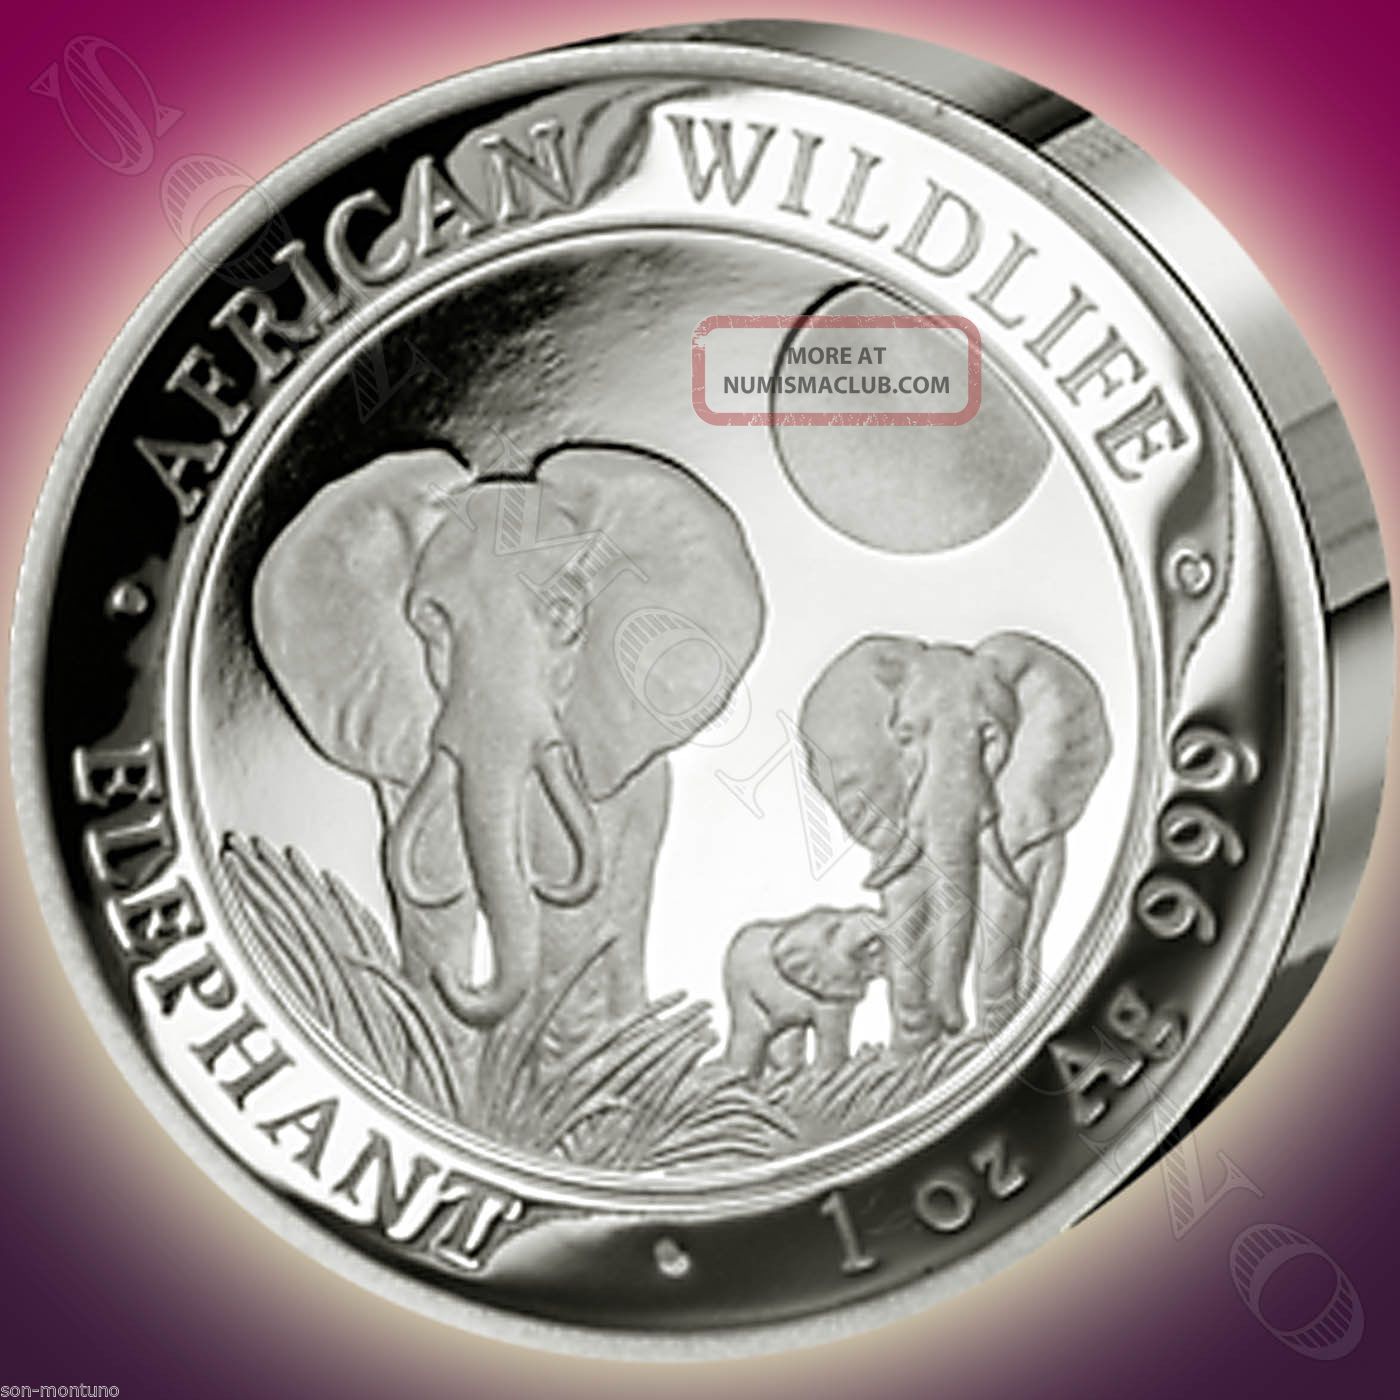 2014 Somalia High Relief Proof African Wildlife Elephant 1 Oz Silver Coin